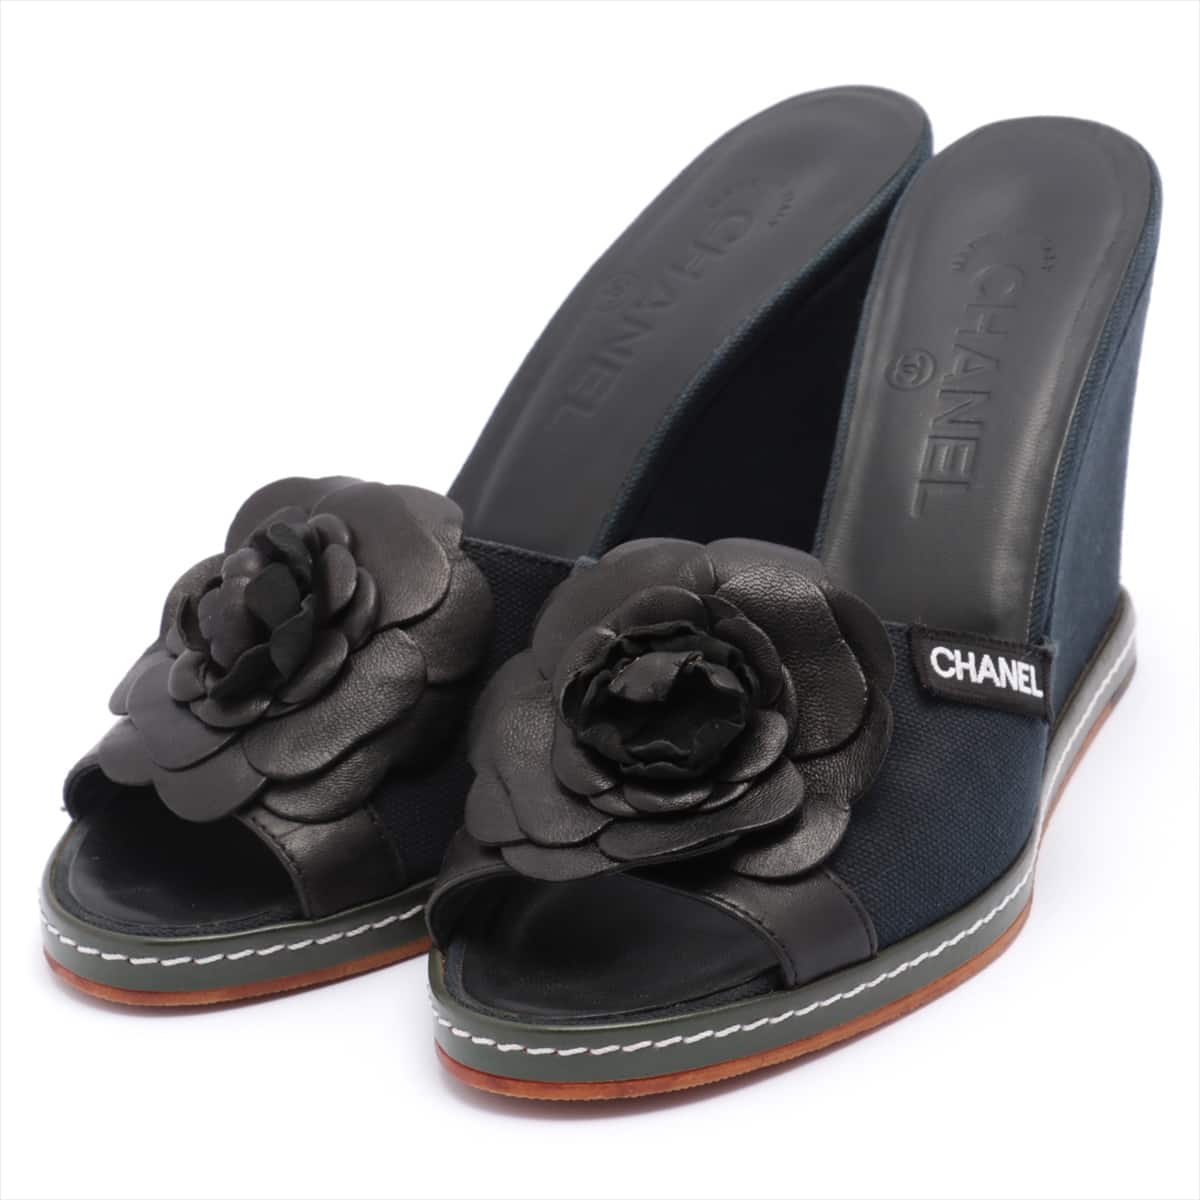 Chanel Canvas & leather Sandals 38.5 Ladies' Green Camelia